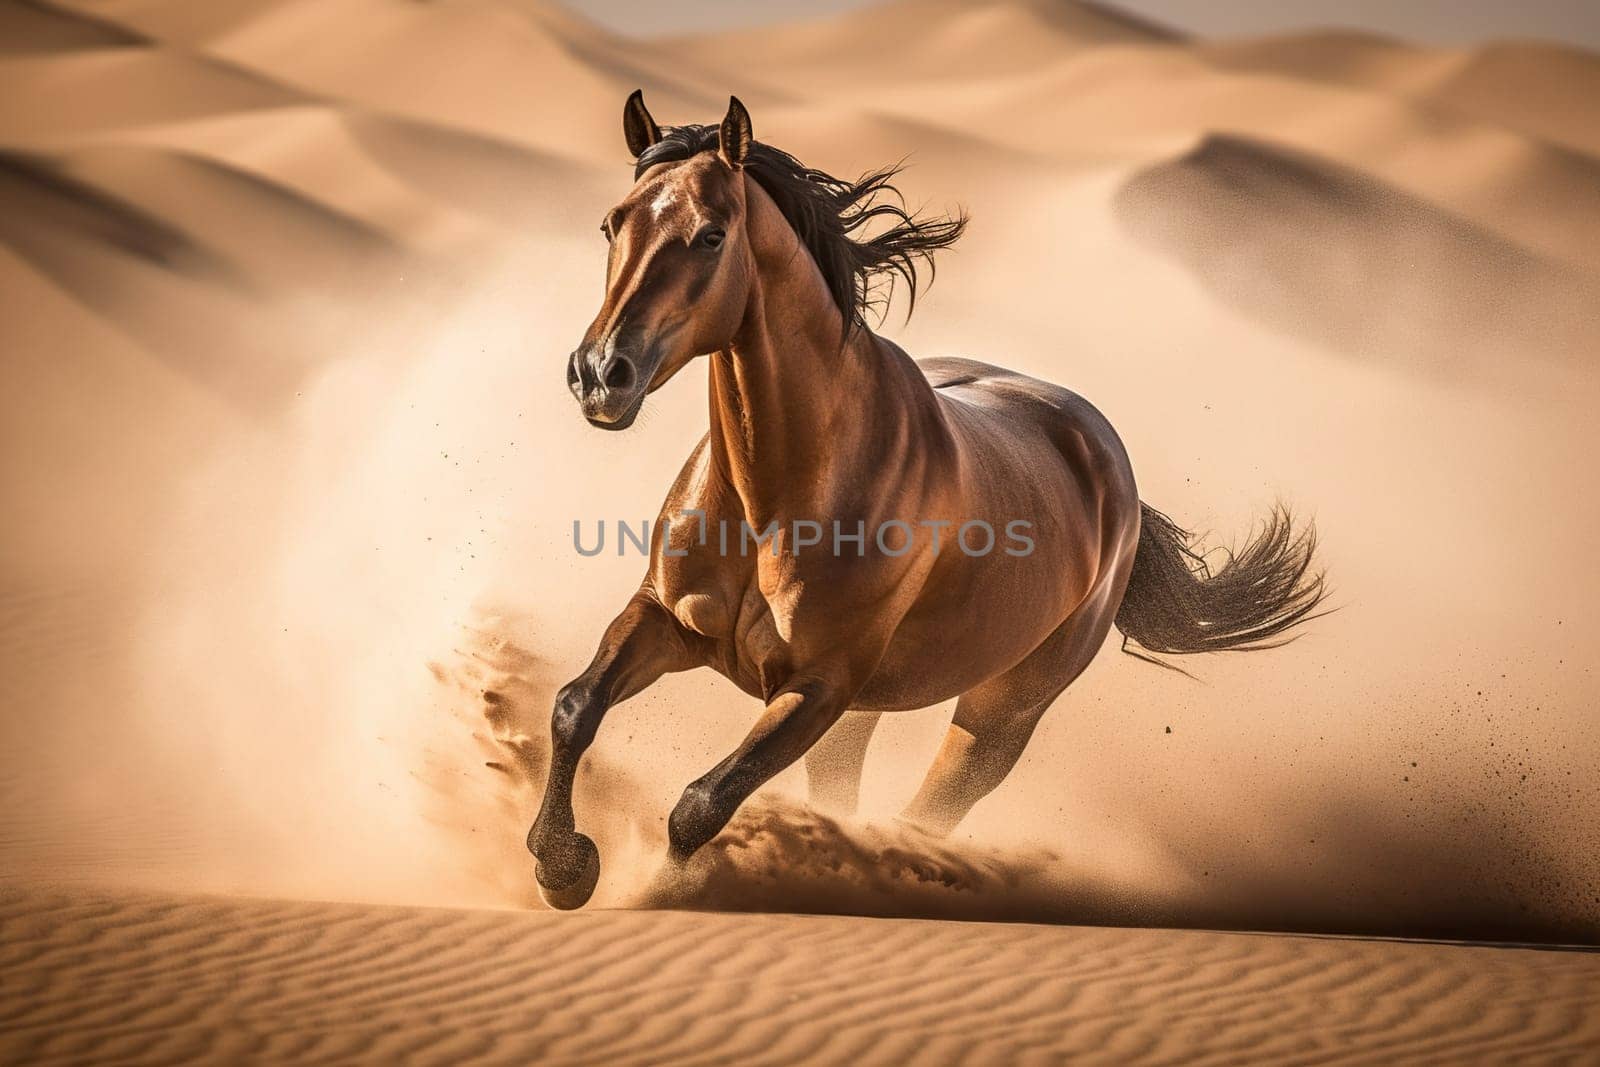 Gharging Horse In The Heat Of The Desert, The Horse Kicks Up Sand As It Races Across The Dunes